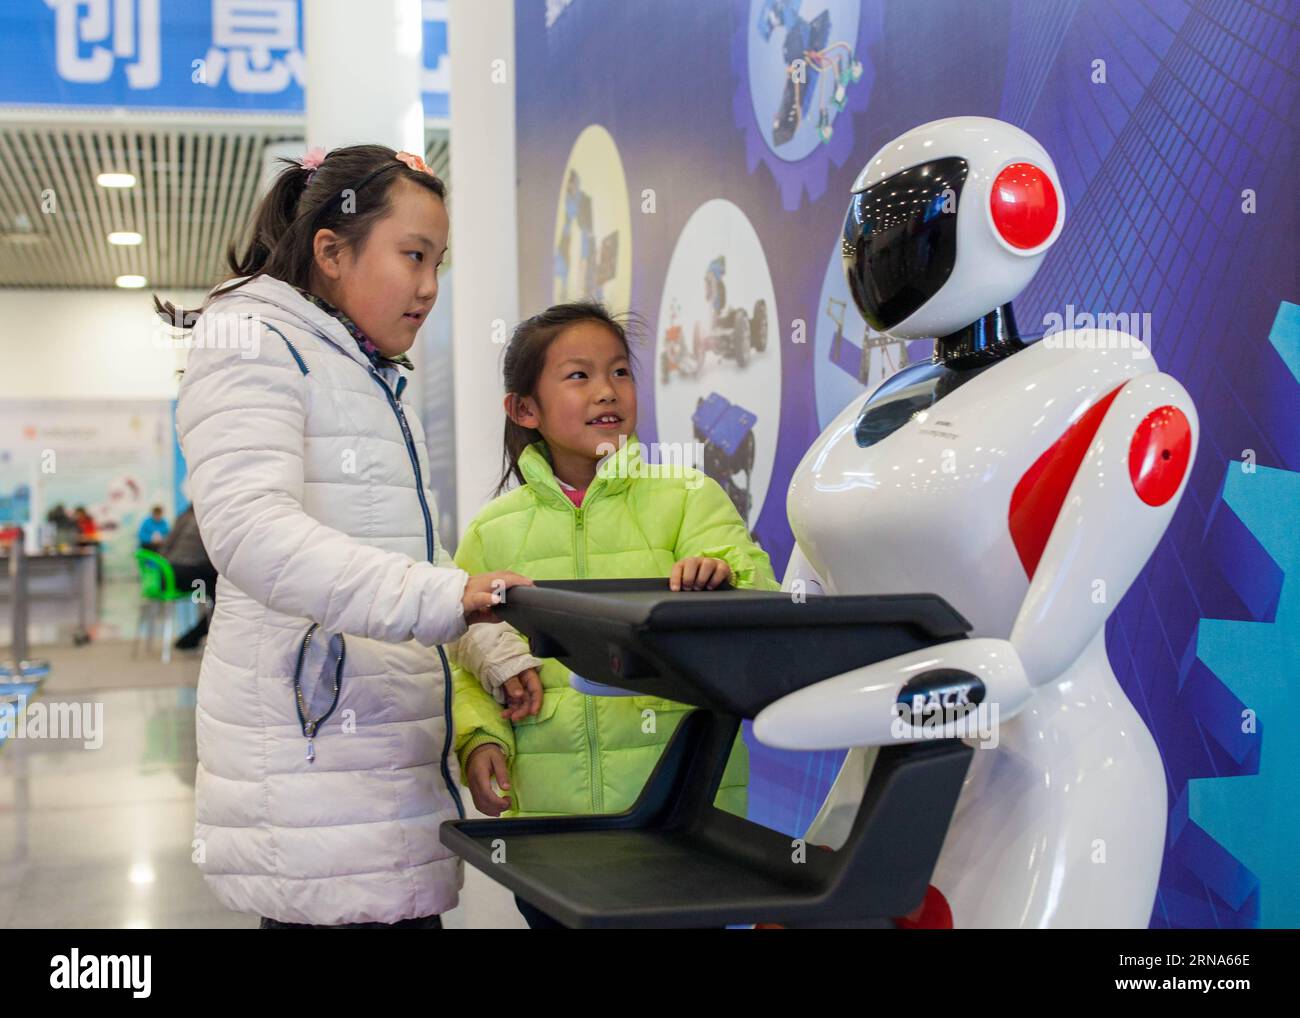 (160108) -- HOHHOT, Jan. 8, 2016 -- Two girls interact with a robot during a robot carnival in Hohhot, capital of north China s Inner Mongolia Autonomous Region, Jan. 8, 2016. A carnival was held here to invite younsters to come and engage high technology of modern robot. ) (cxy) CHINA-INNER MONGOLIA-ROBOT-CARNIVAL (CN) DingxGenhou PUBLICATIONxNOTxINxCHN   160108 Hohhot Jan 8 2016 Two Girls interact With a Robot during a Robot Carnival in Hohhot Capital of North China S Inner Mongolia Autonomous Region Jan 8 2016 a Carnival what Hero Here to invite younsters to Come and Engage High Technology Stock Photo